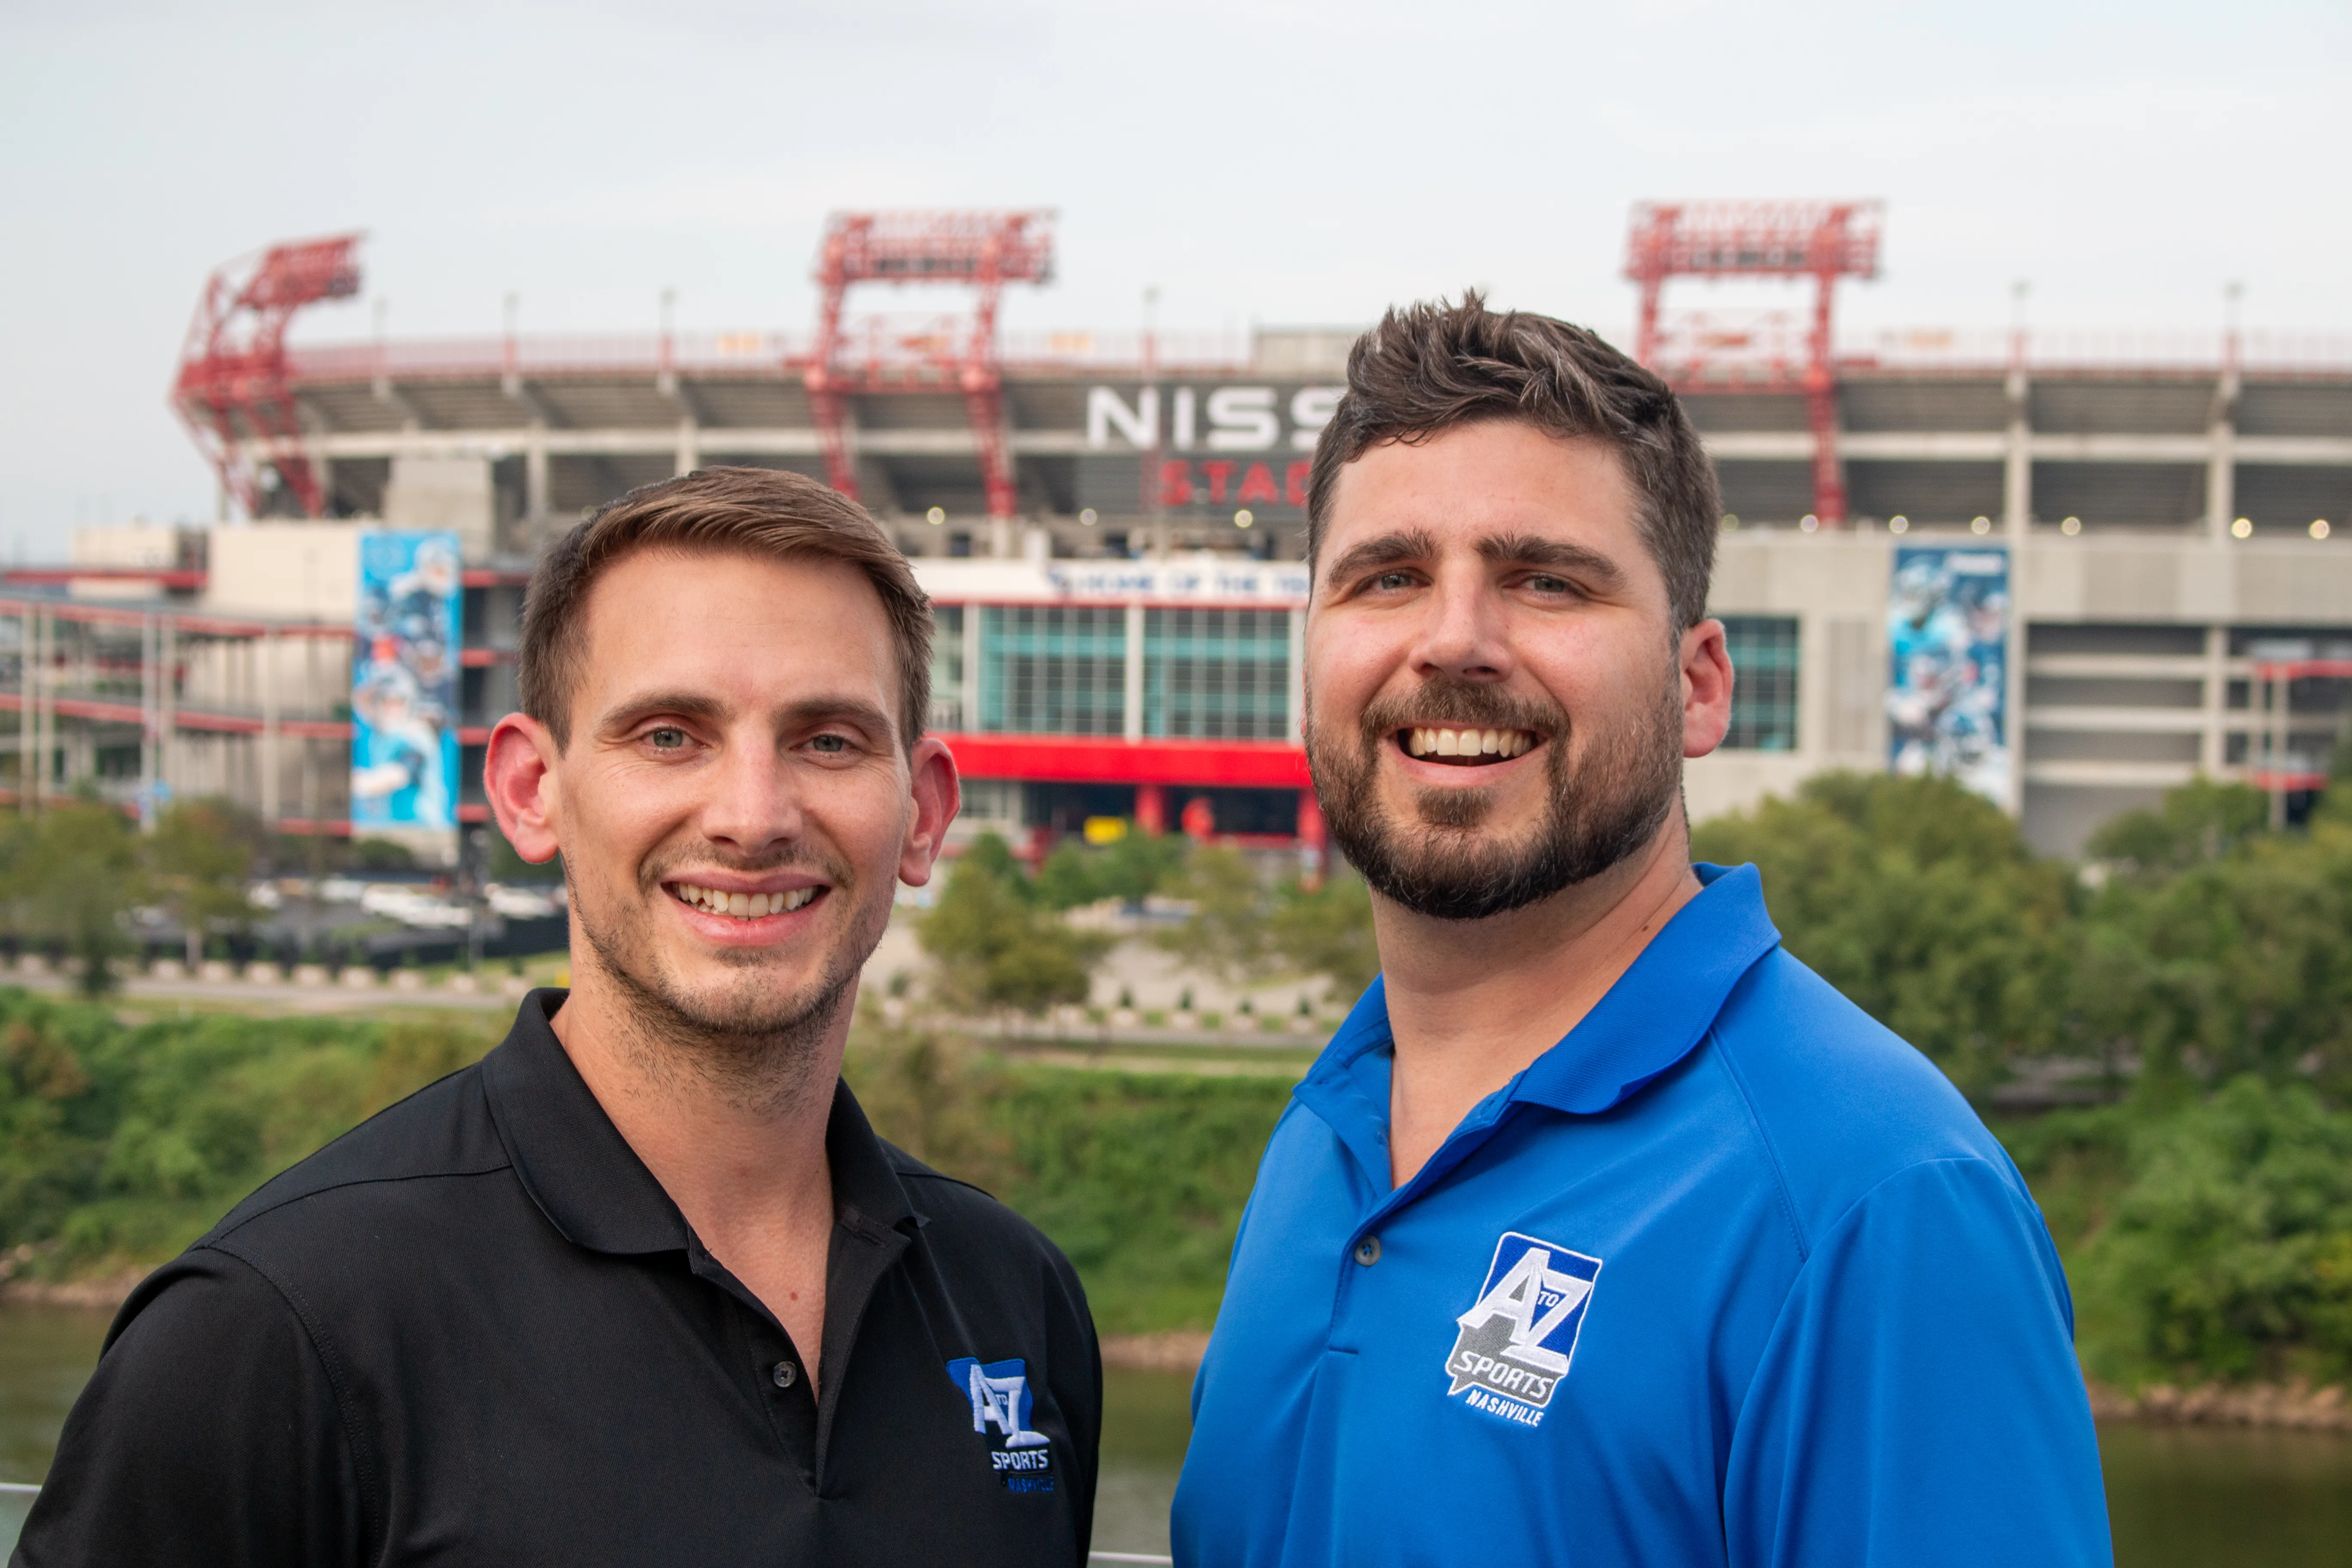 The A to Z Sports co-founders at Nissan Stadium in Nashville